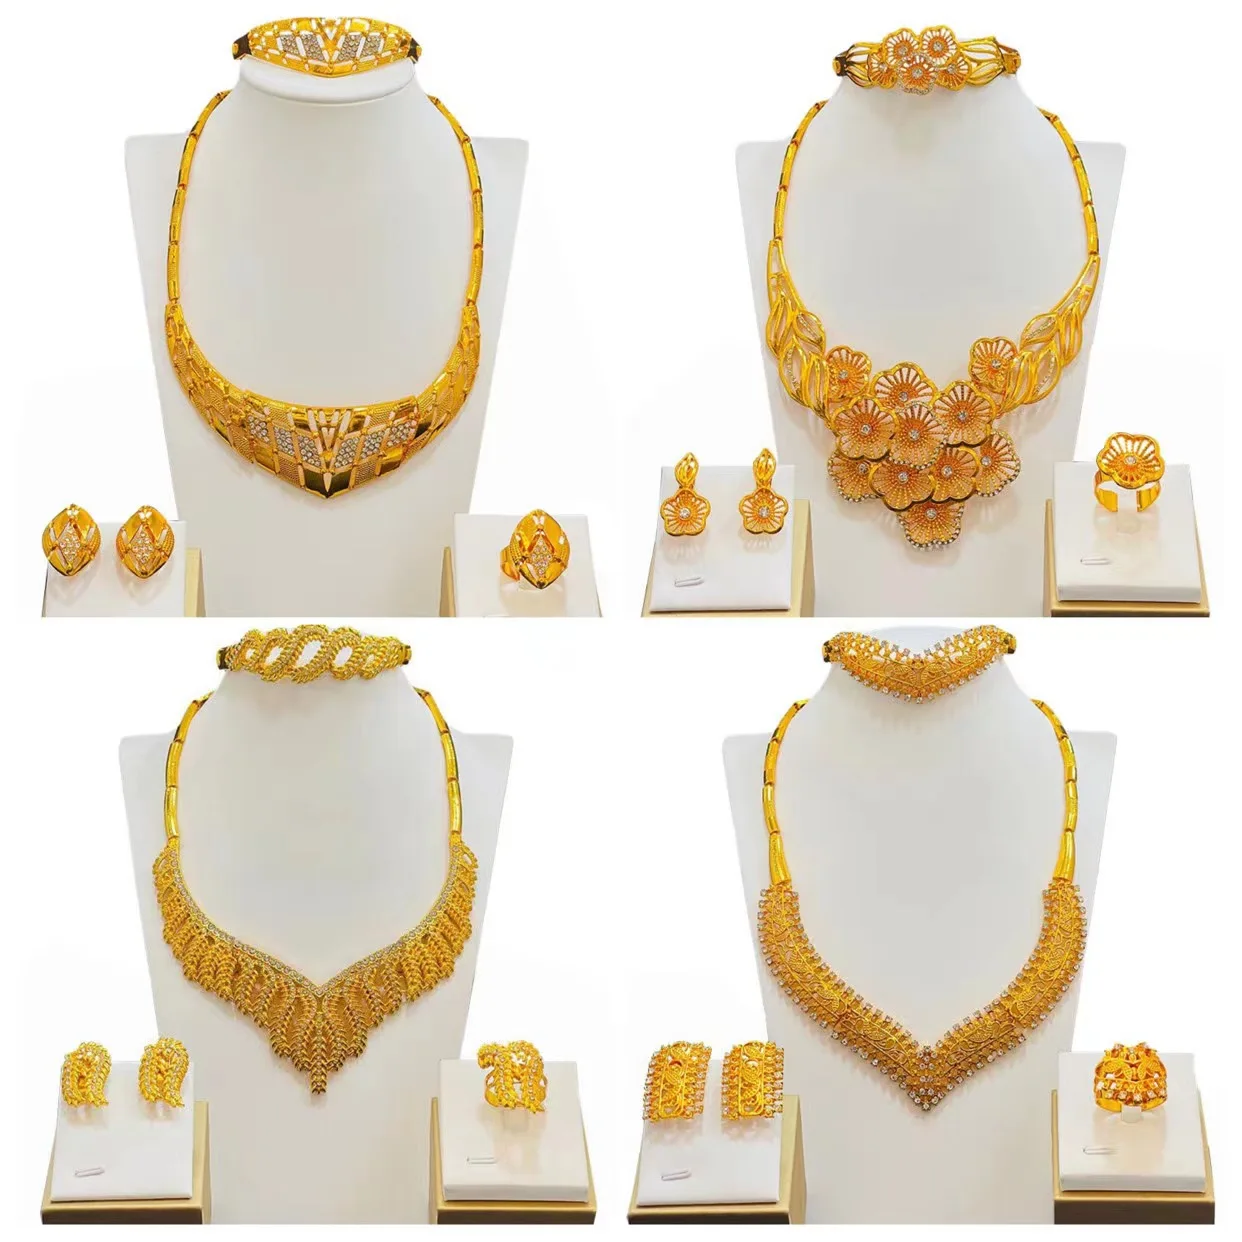 

Ethiopian Jewelry Set Women 24K Gold Color Dubai Jewelery African Bridal Necklace And Earrings Wedding Collection Big Nigerian